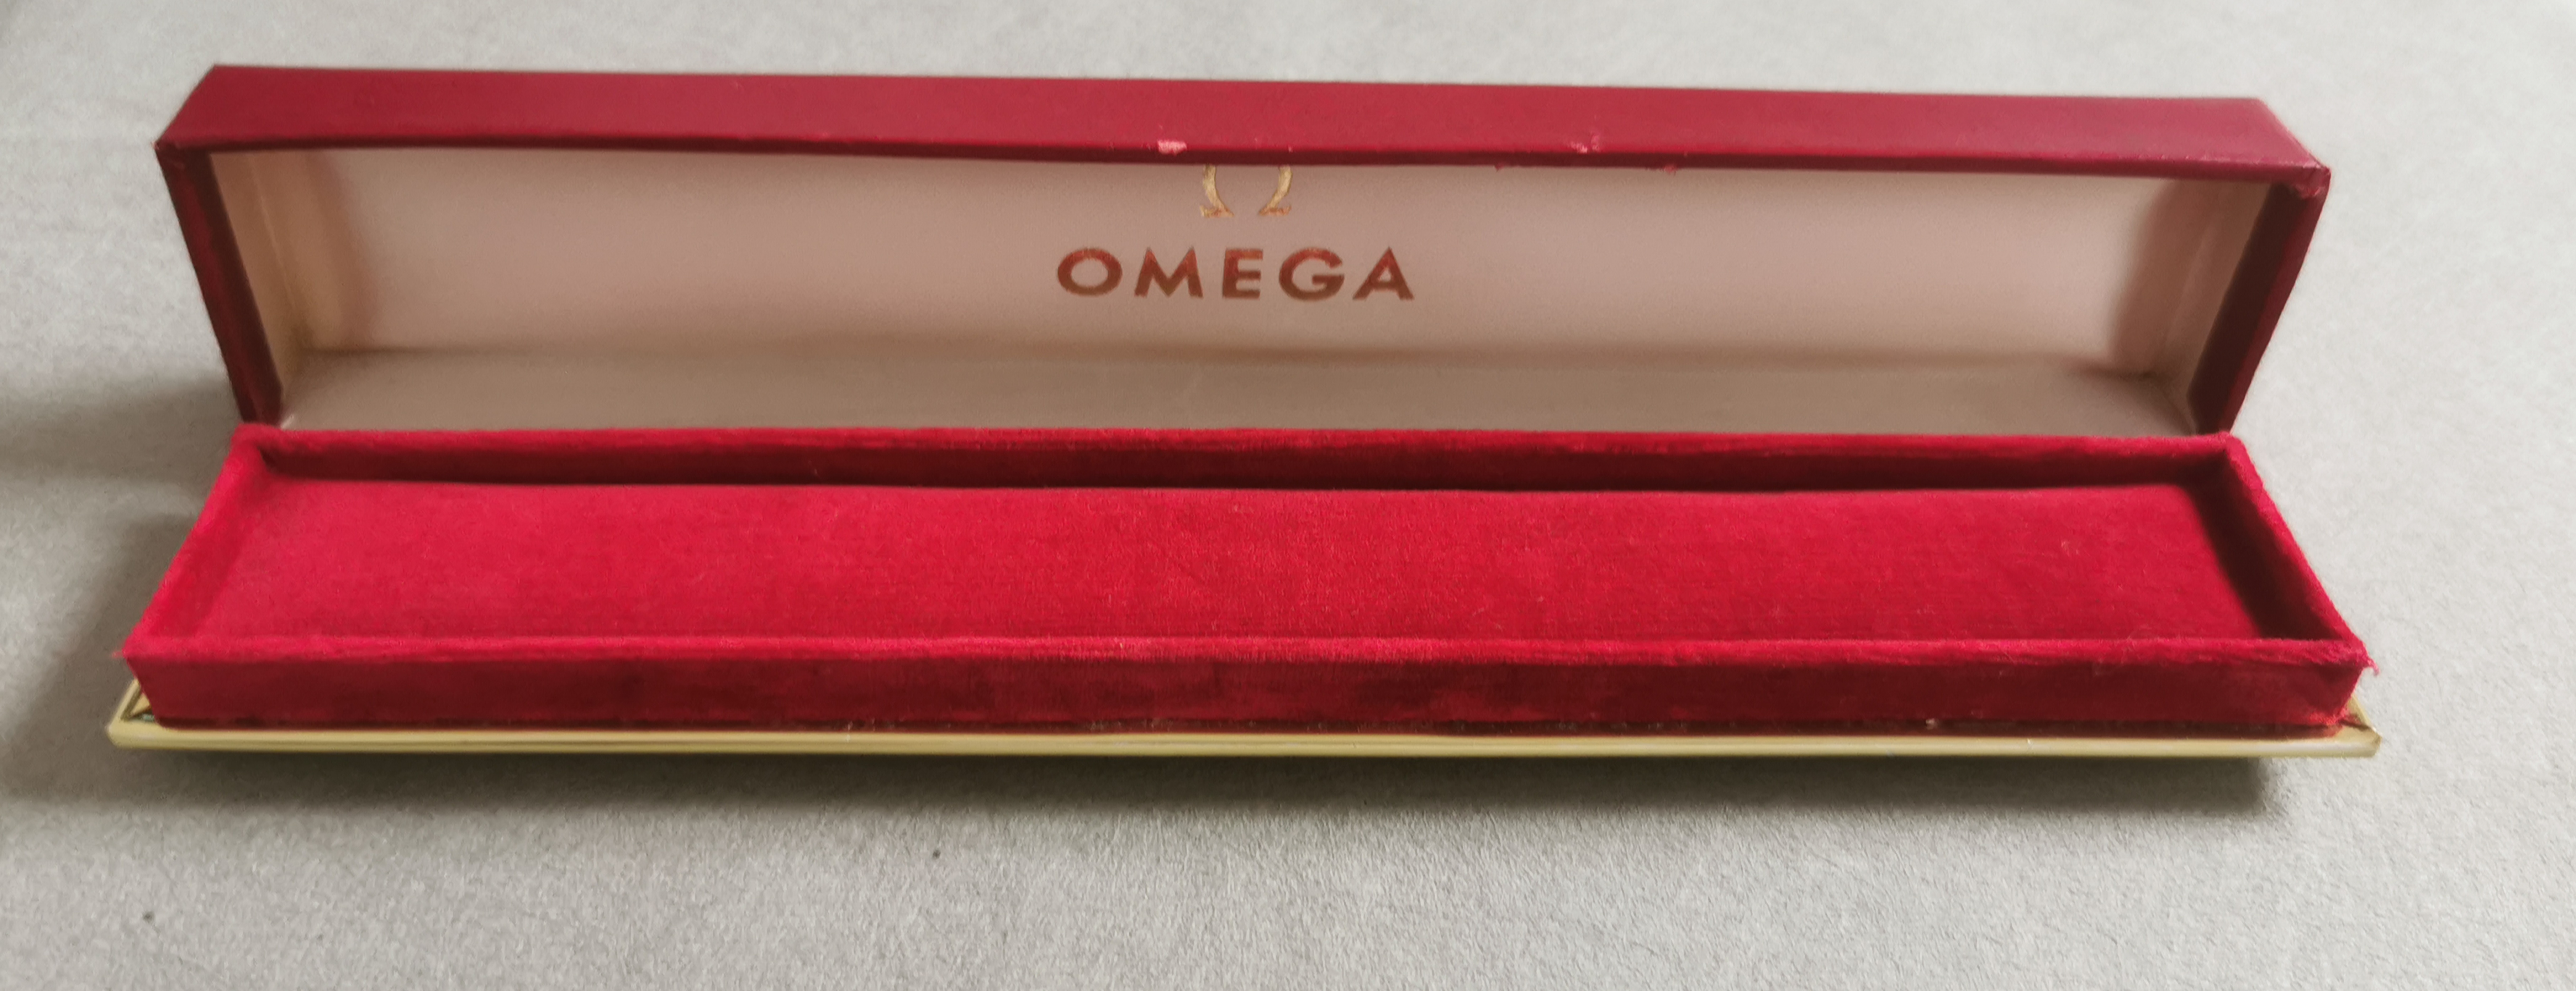 Omega vintage watch box leather red for women models like new condition T2 | San Giorgio a Cremano